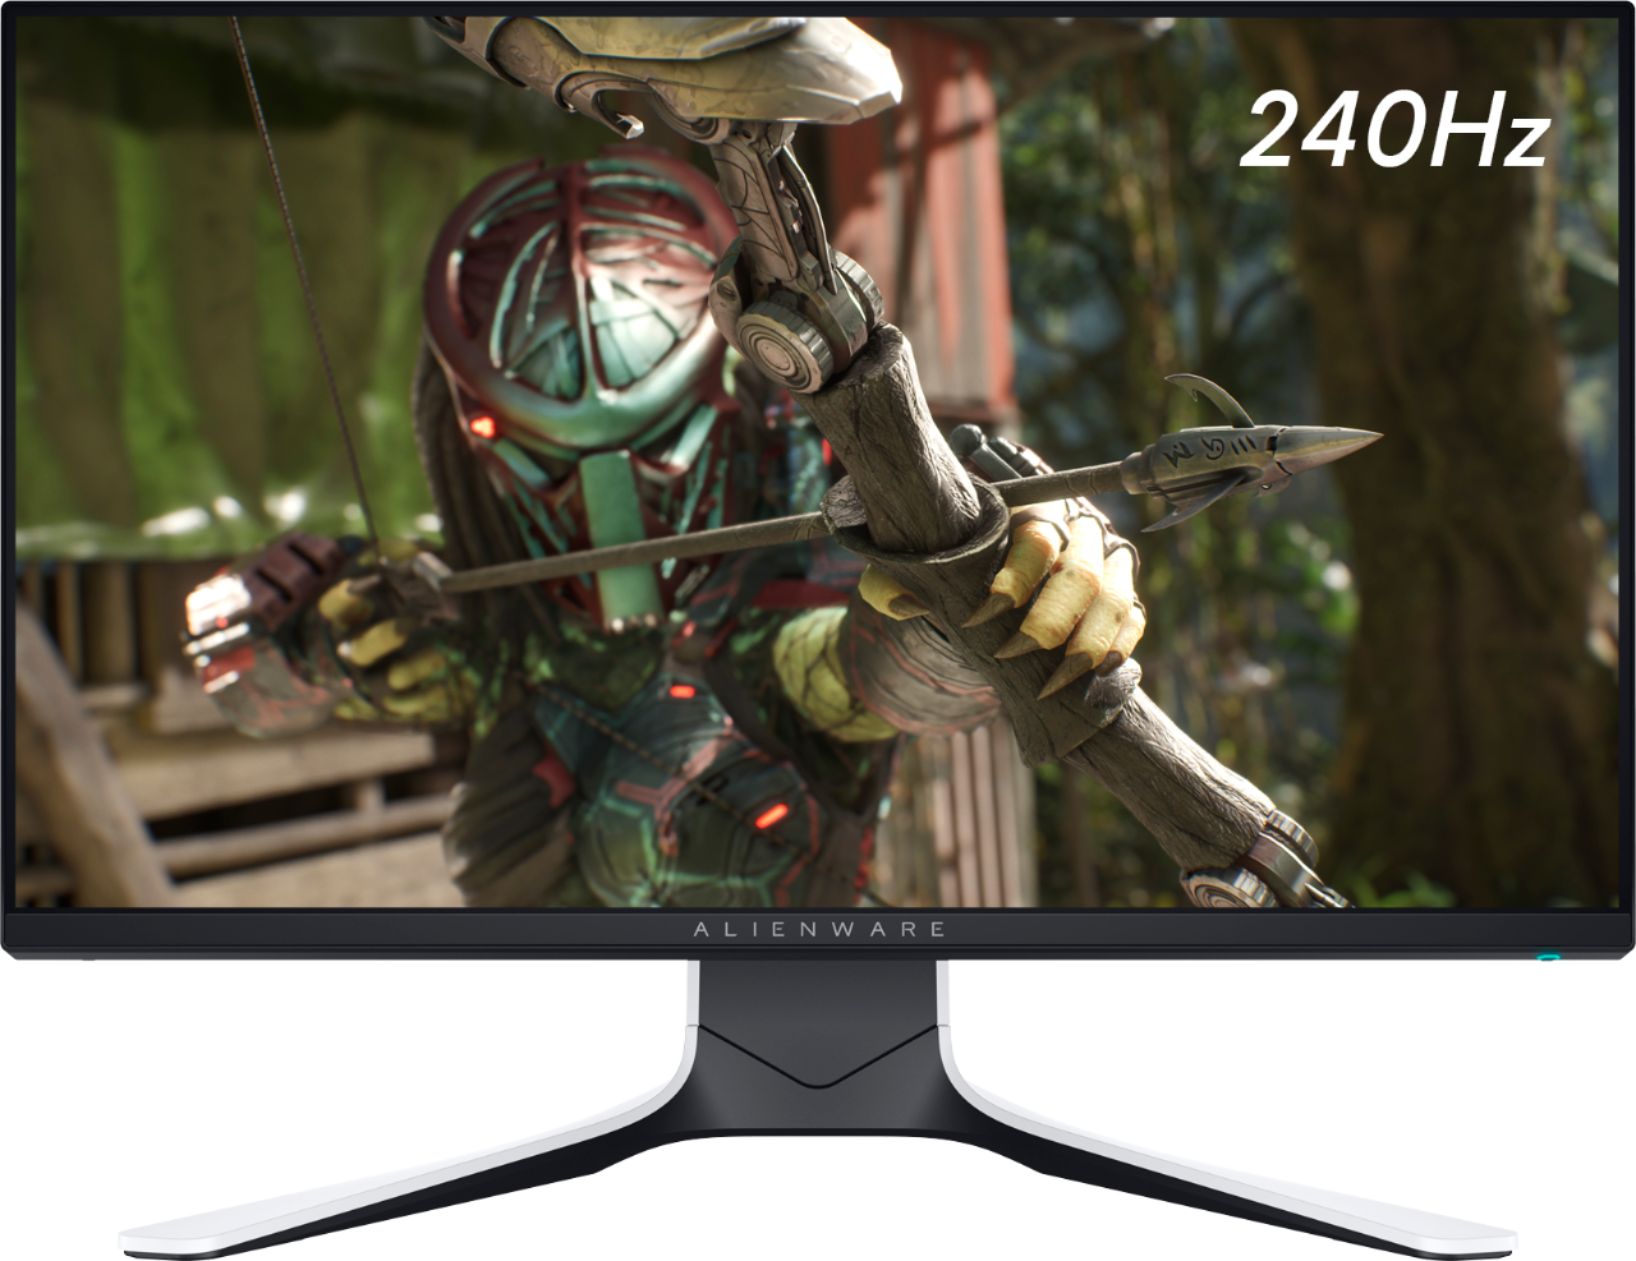 Alienware AW2521HFL 25" IPS LED FHD FreeSync and G-SYNC Compatible Gaming Monitor (DisplayPort, HDMI, USB) Lunar Light RNHC4 Best Buy